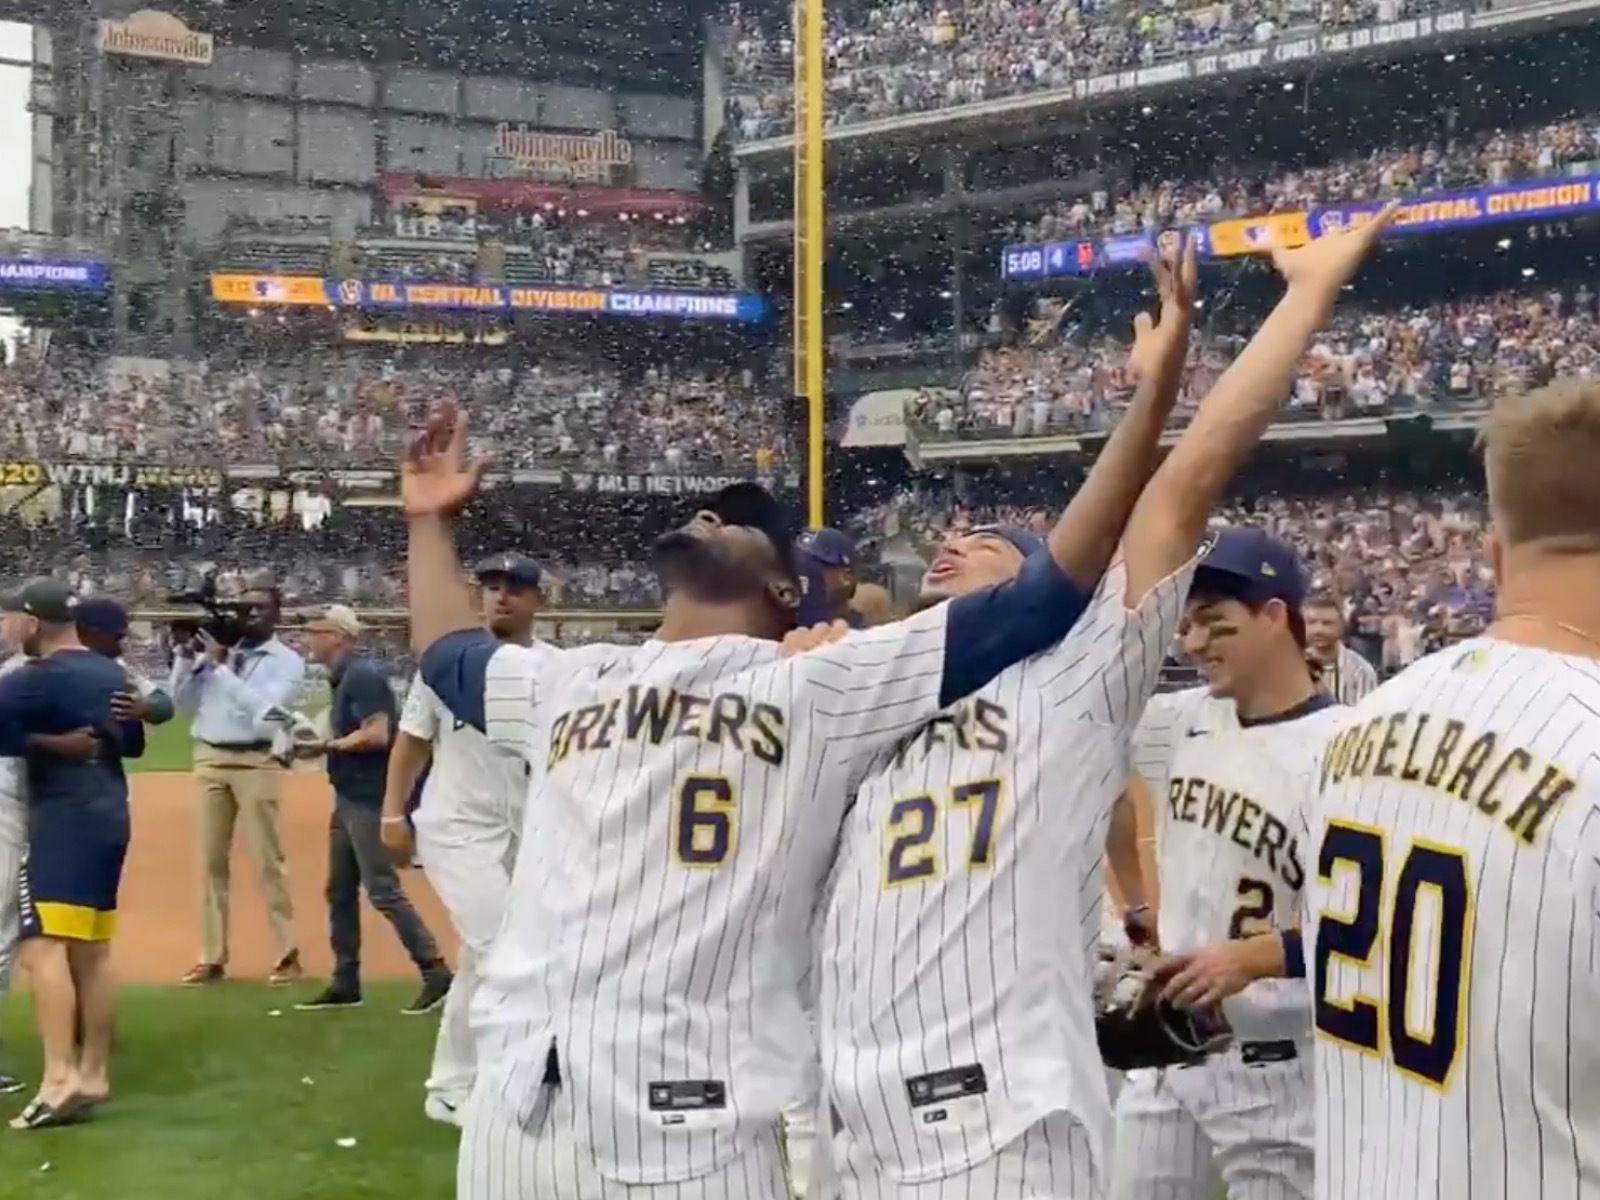 The Central is ours: The Brewers are the 2021 NL Central Division champs